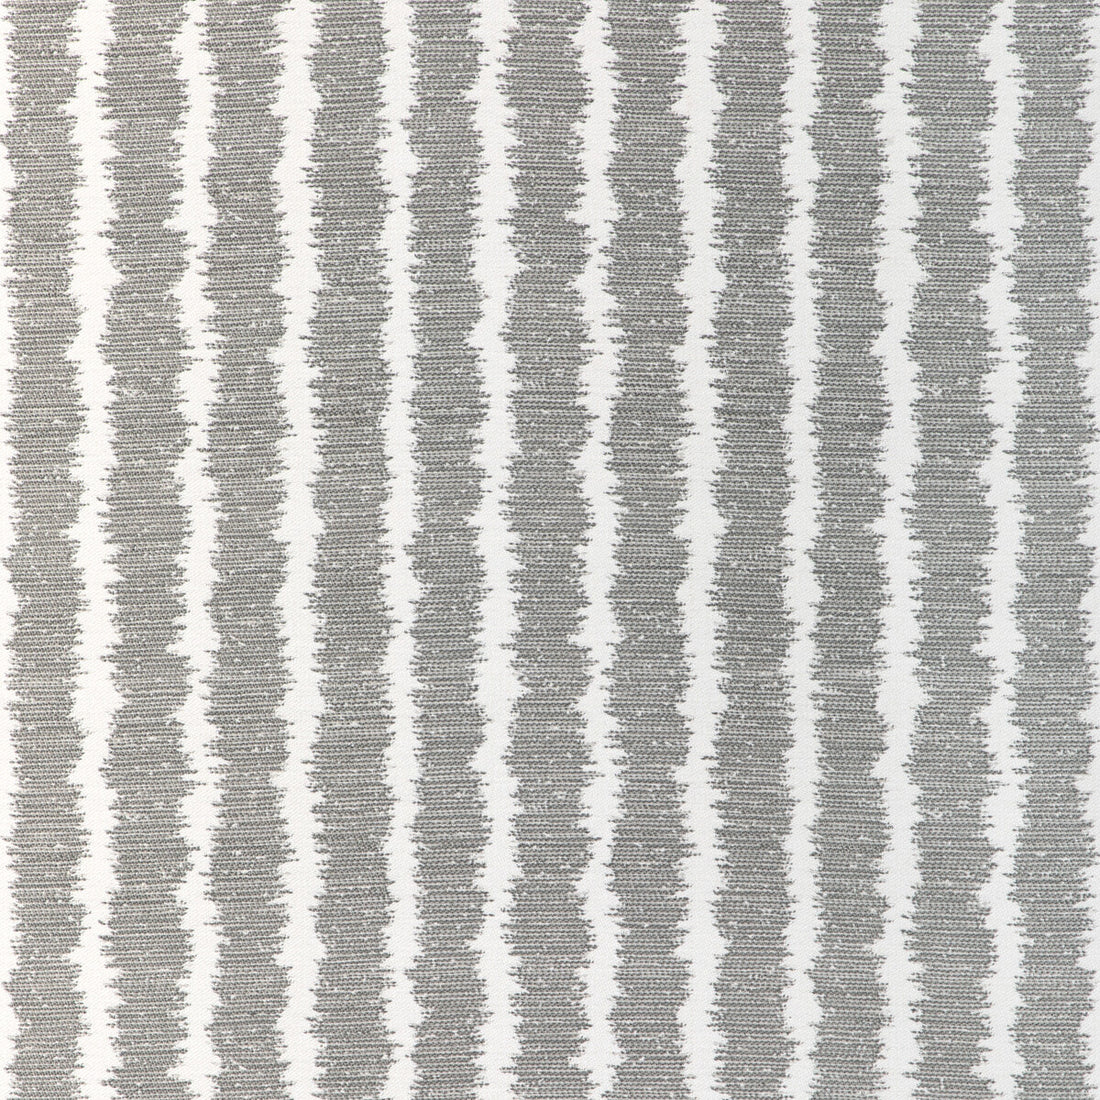 Seaport Stripe fabric in charcoal color - pattern 36917.21.0 - by Kravet Couture in the Riviera collection